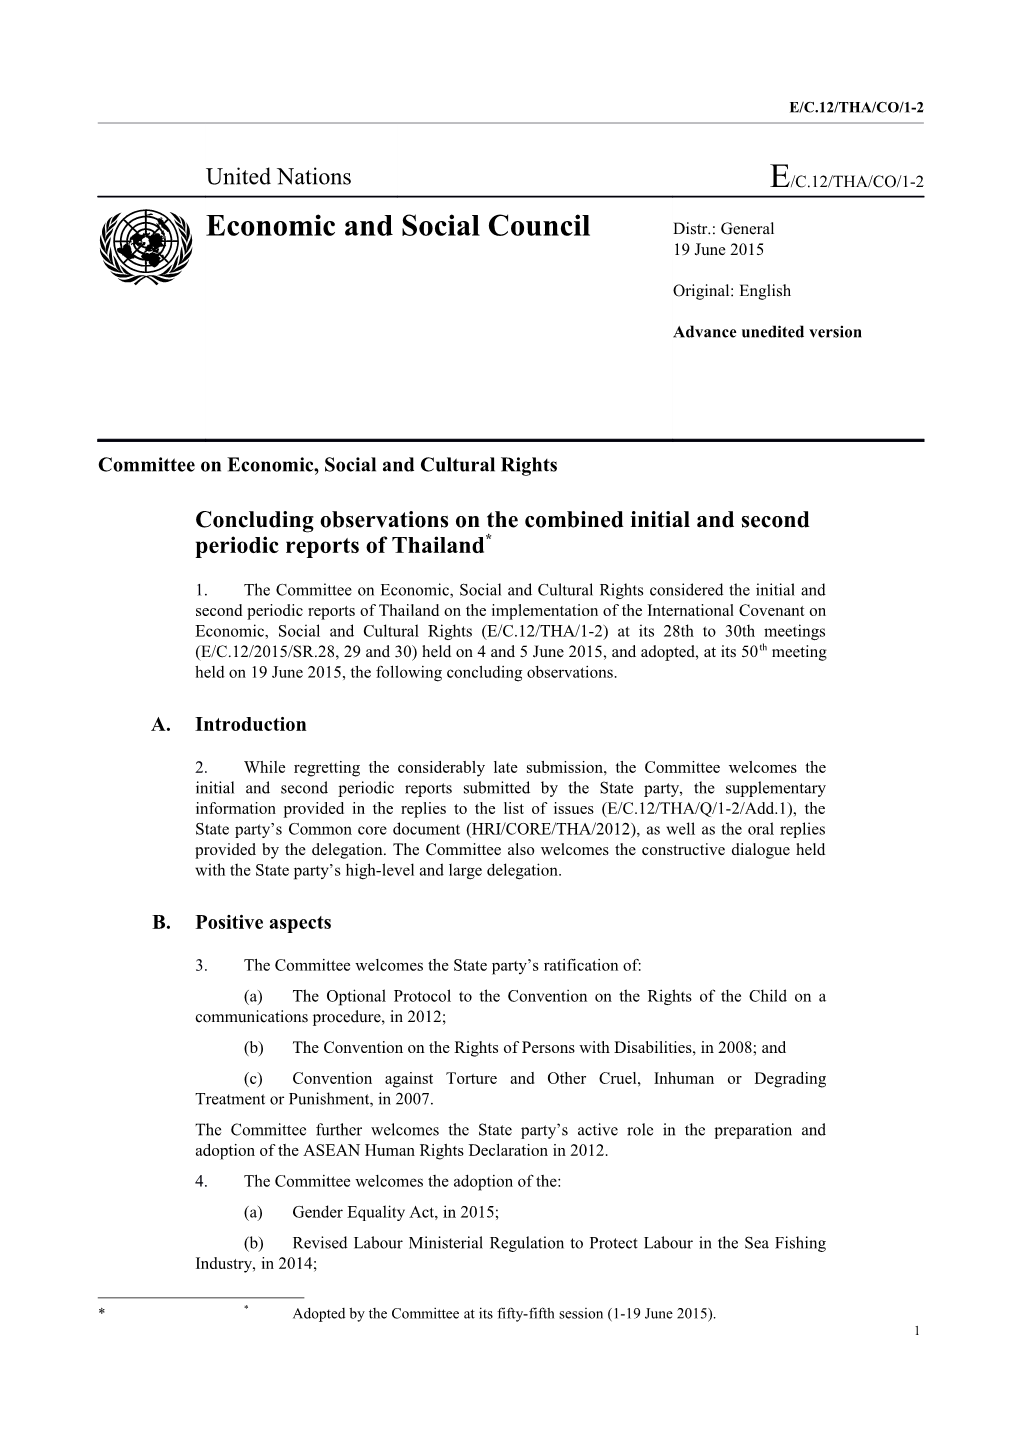 Committee on Economic, Social and Cultural Rights s5